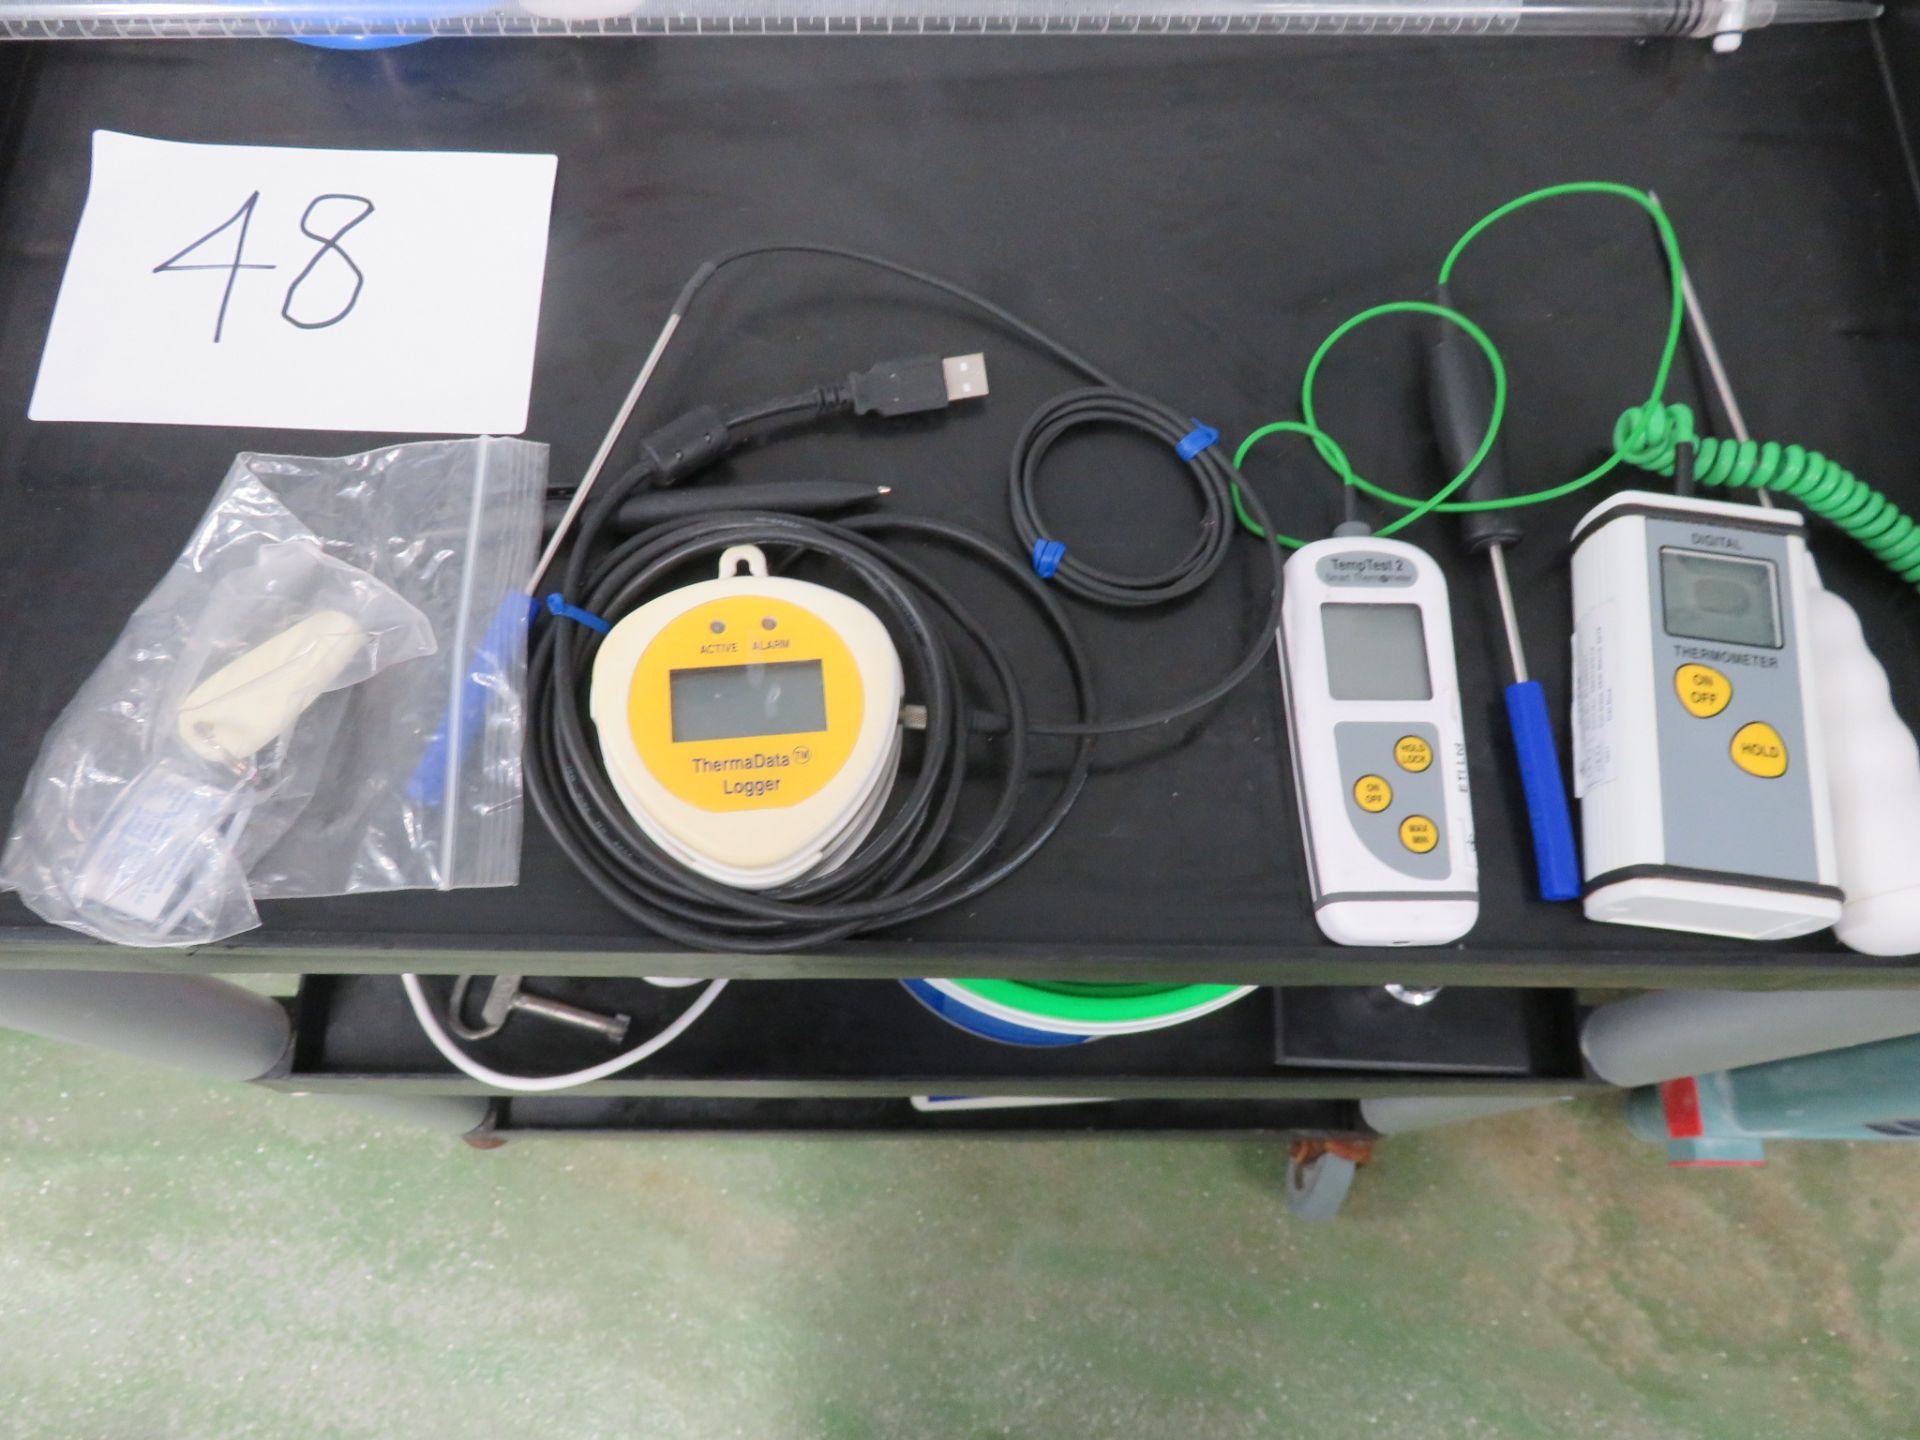 2 x Thermometers and data logger.